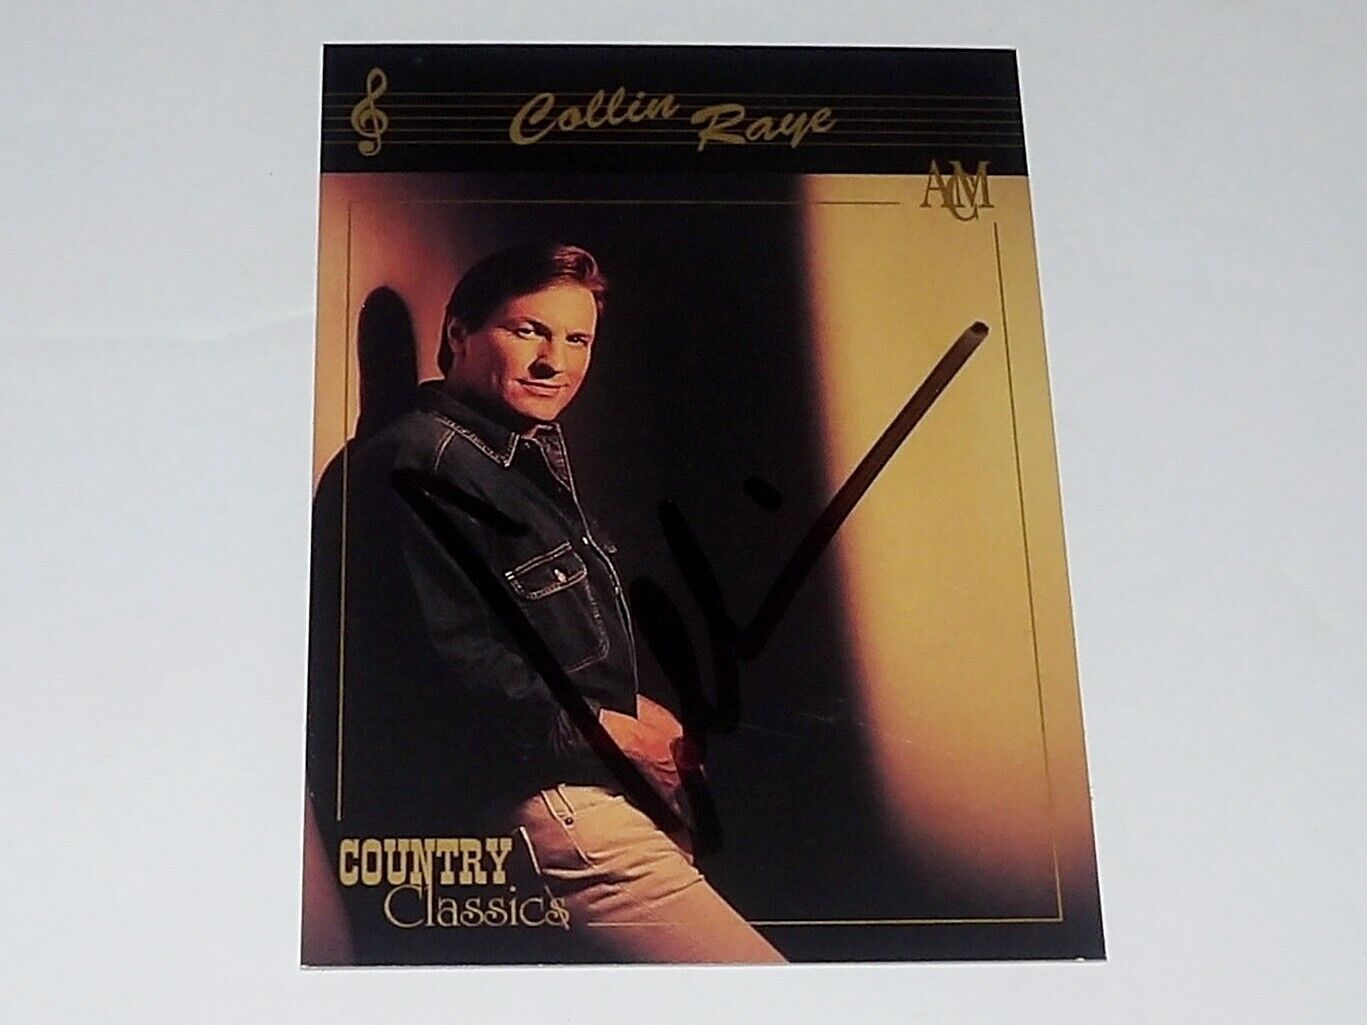 1992 COUNTRY CLASSICS TRADING CARD HANDSIGNED BY COLLIN RAYE IN PERSON